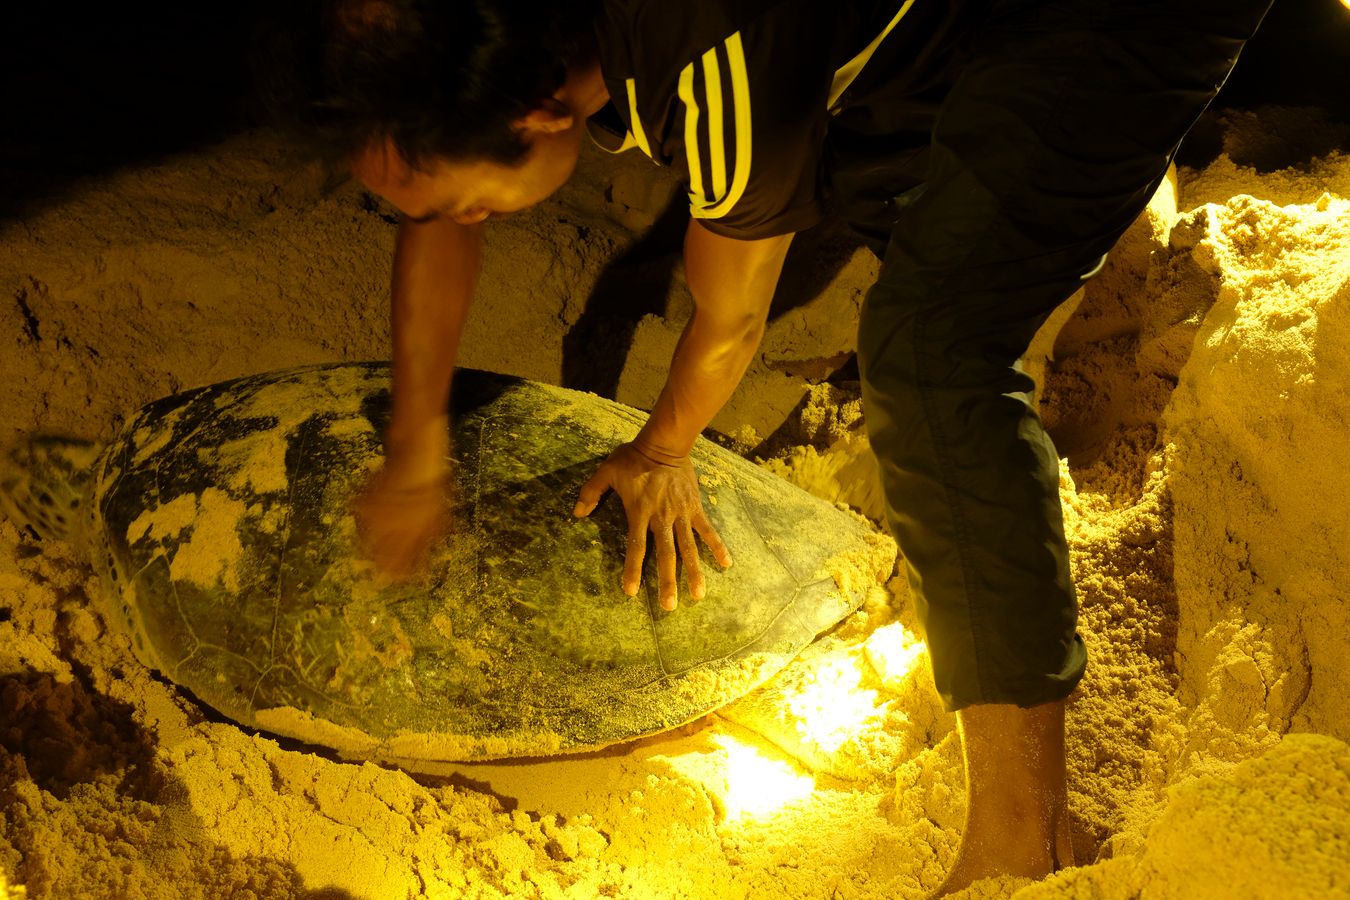 Ranger removes barnacles crustaceans that a green turtle has attached to its shell.